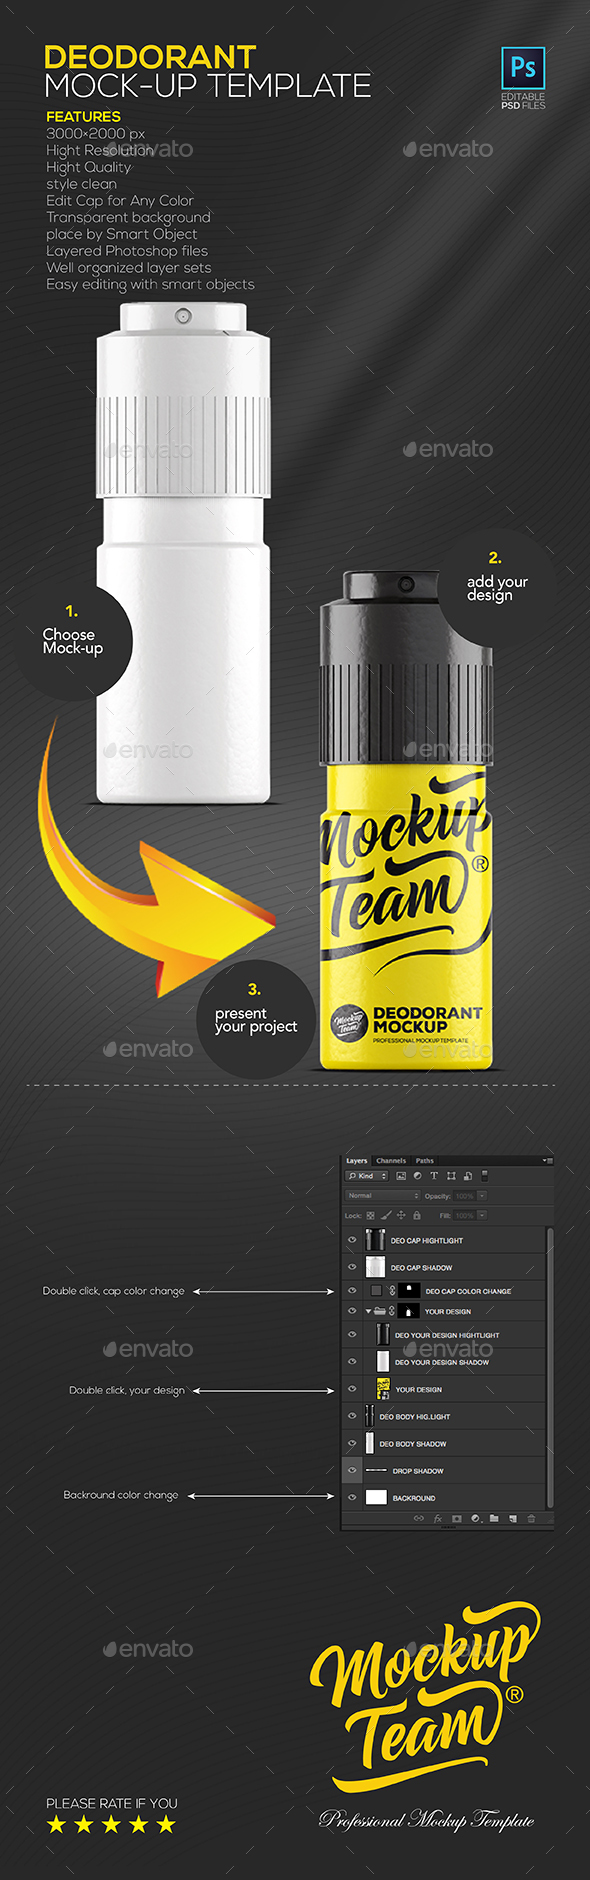 Download Deodorant Mockup Graphics Designs Templates From Graphicriver